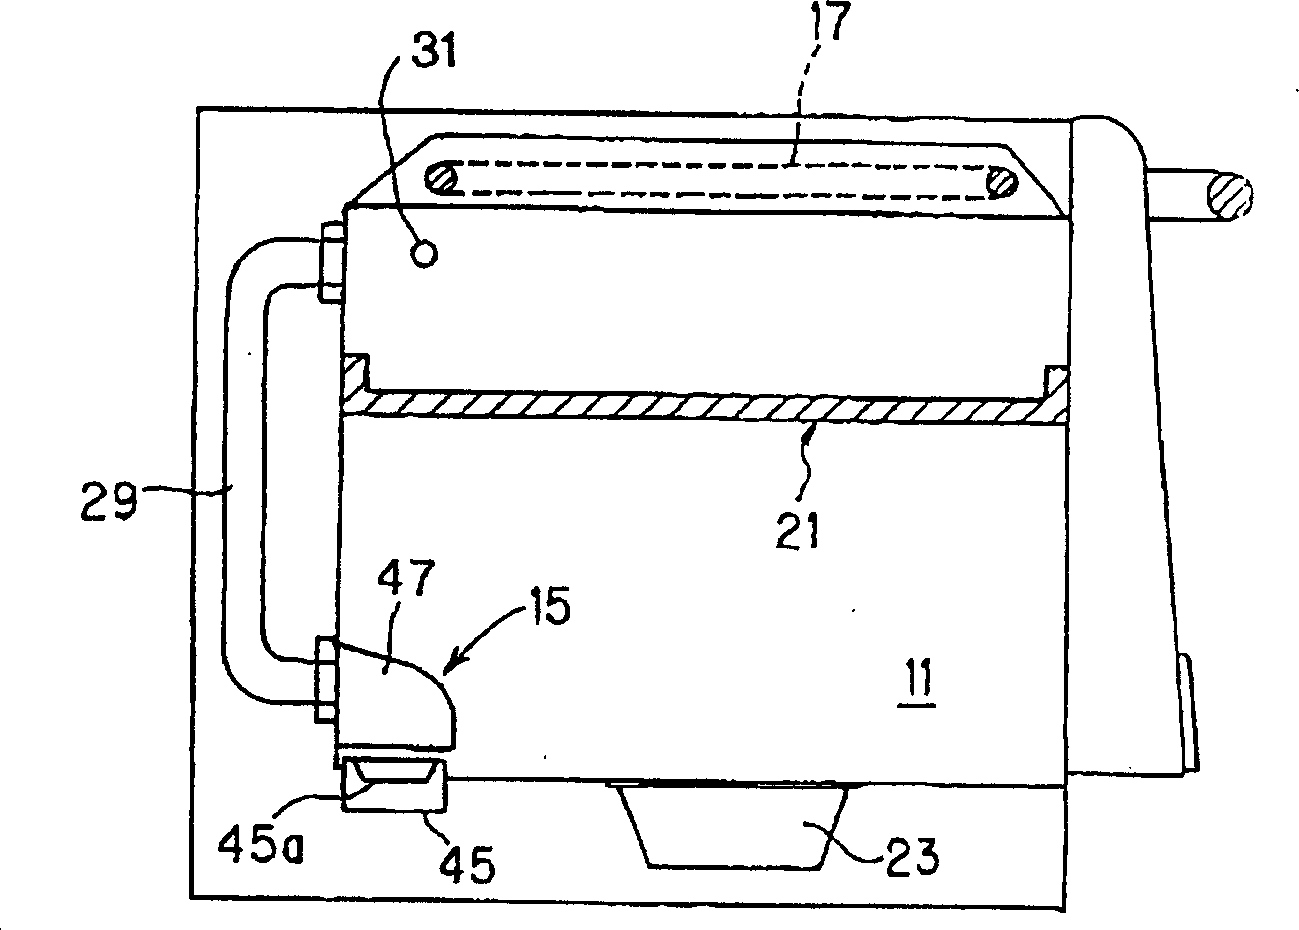 High frequency heating apparatus having a steam generating function